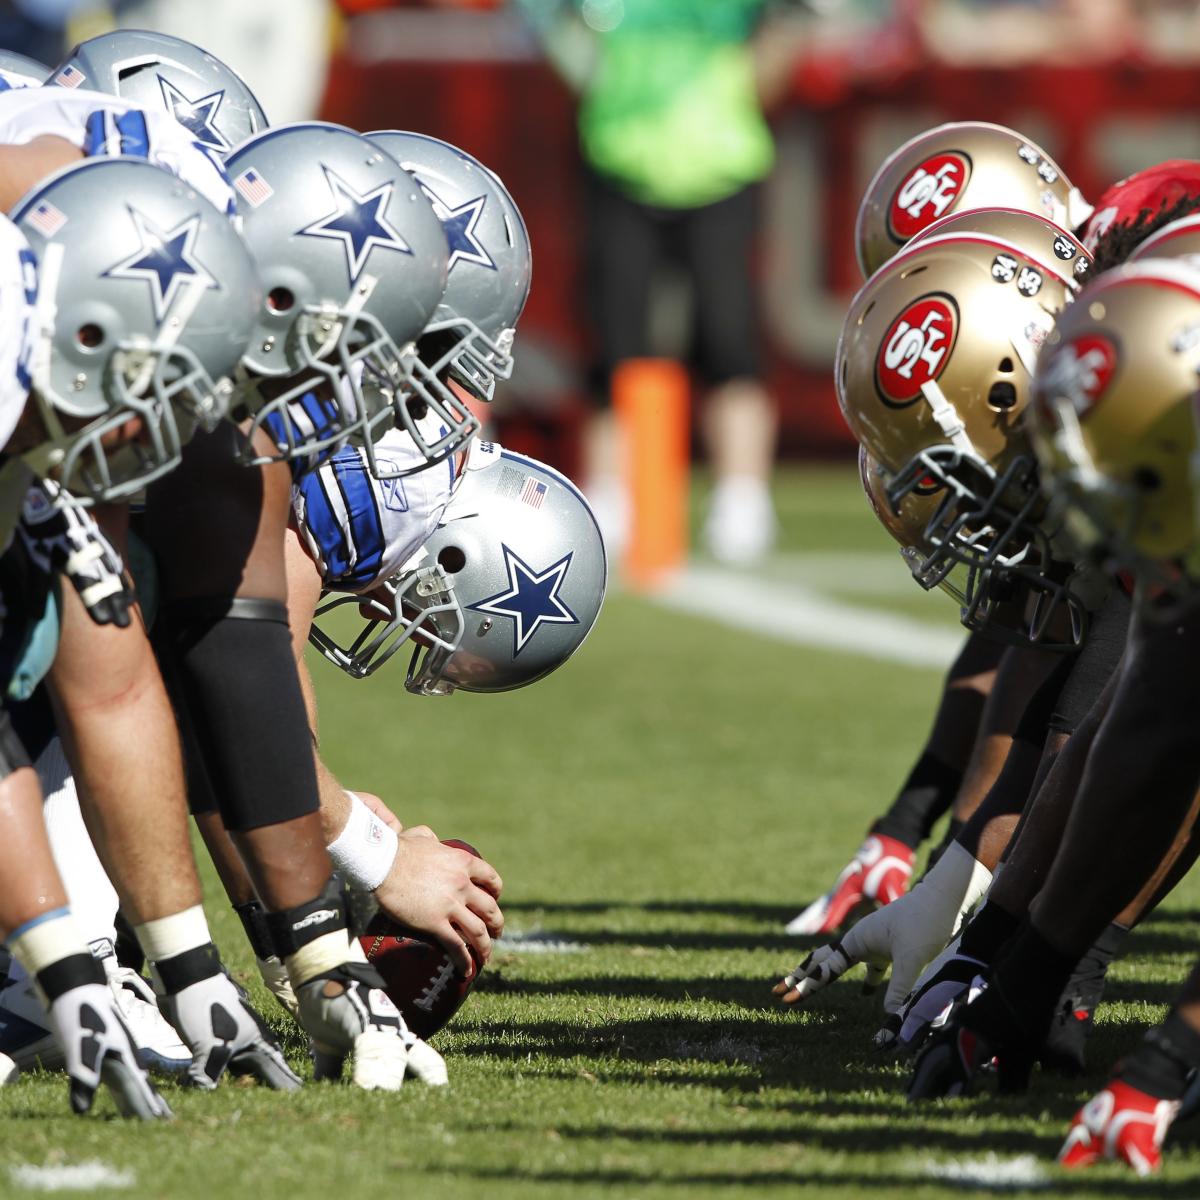 Cowboys vs. 49ers Live Score and Analysis for San Francisco Bleacher